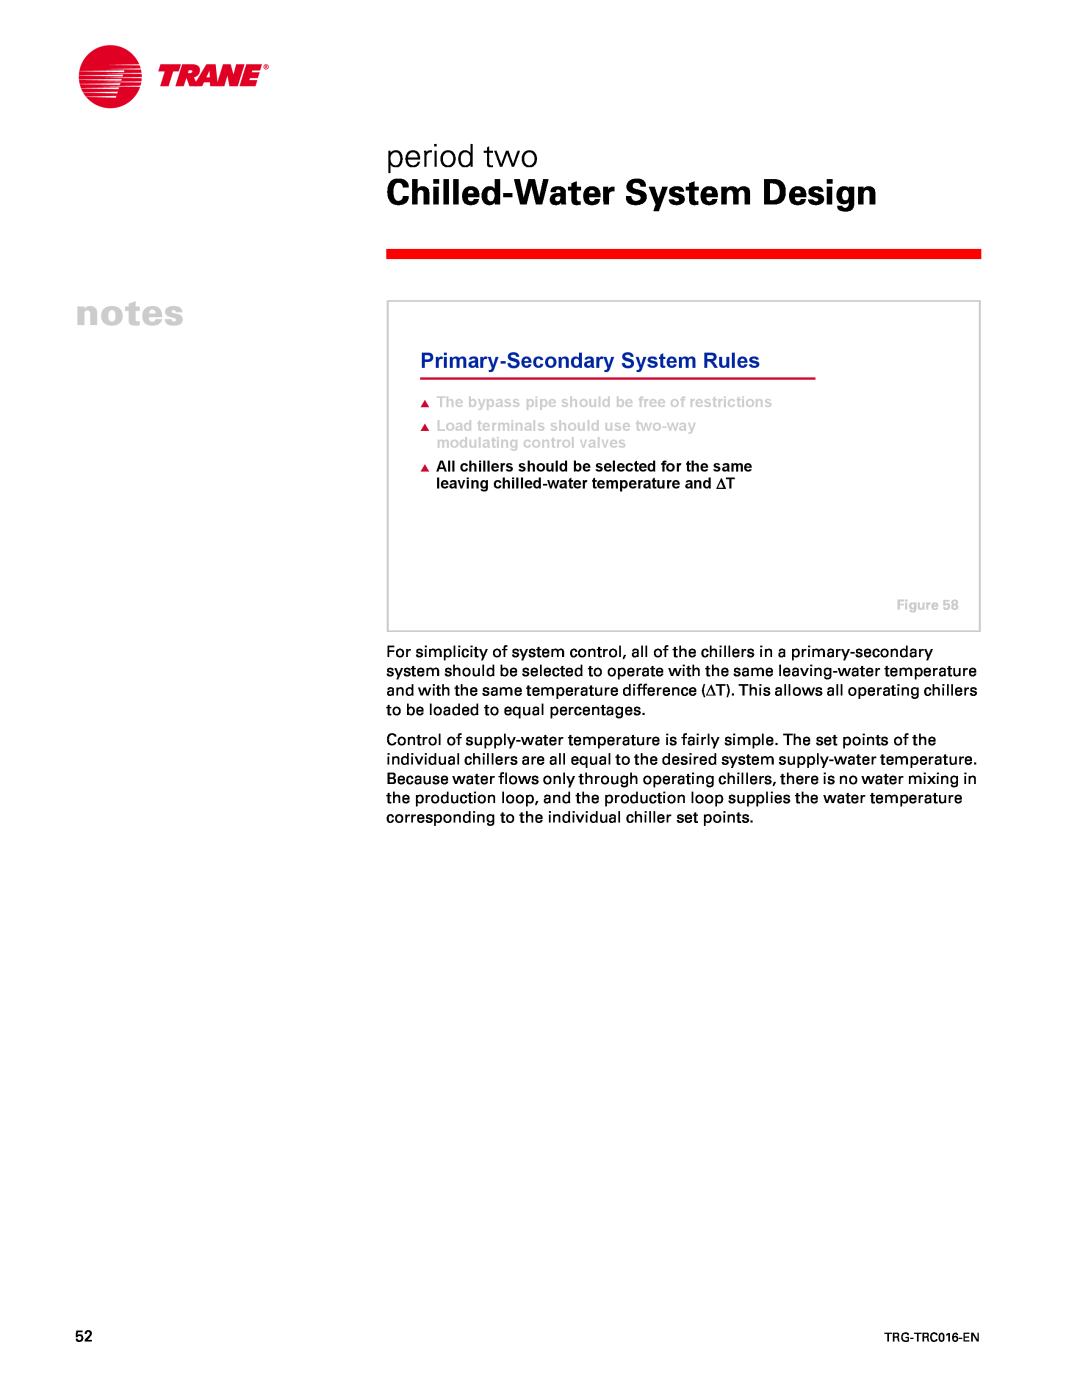 Trane TRG-TRC016-EN manual notes, Chilled-WaterSystem Design, period two, Primary-SecondarySystem Rules 